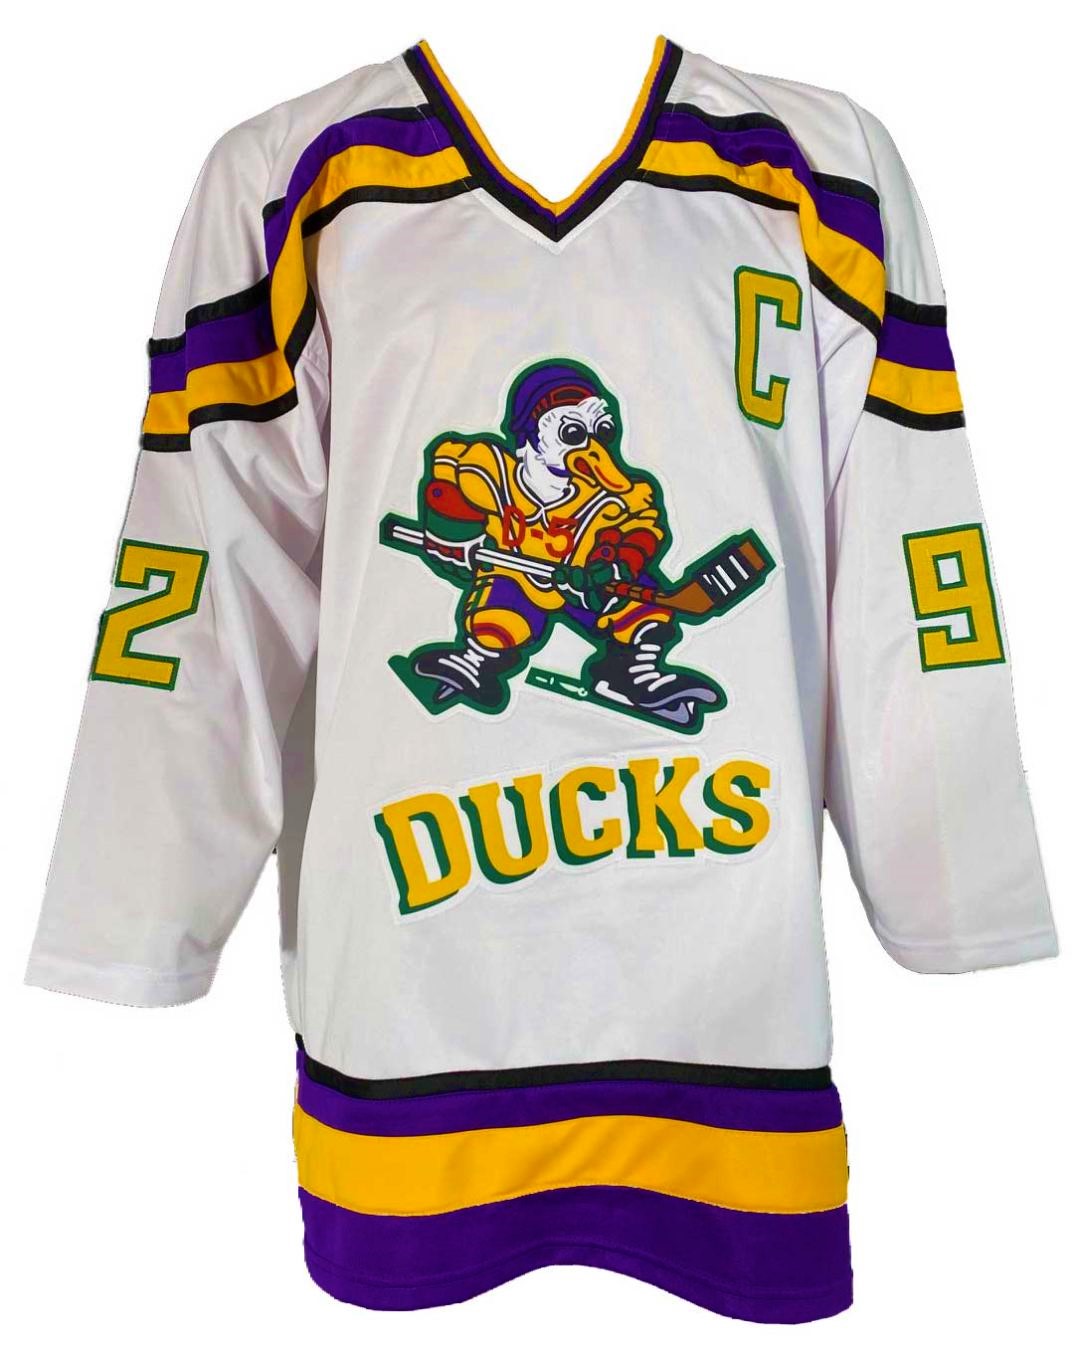 Mighty Ducks Autographed Custom White Jersey Beckett Authenticated